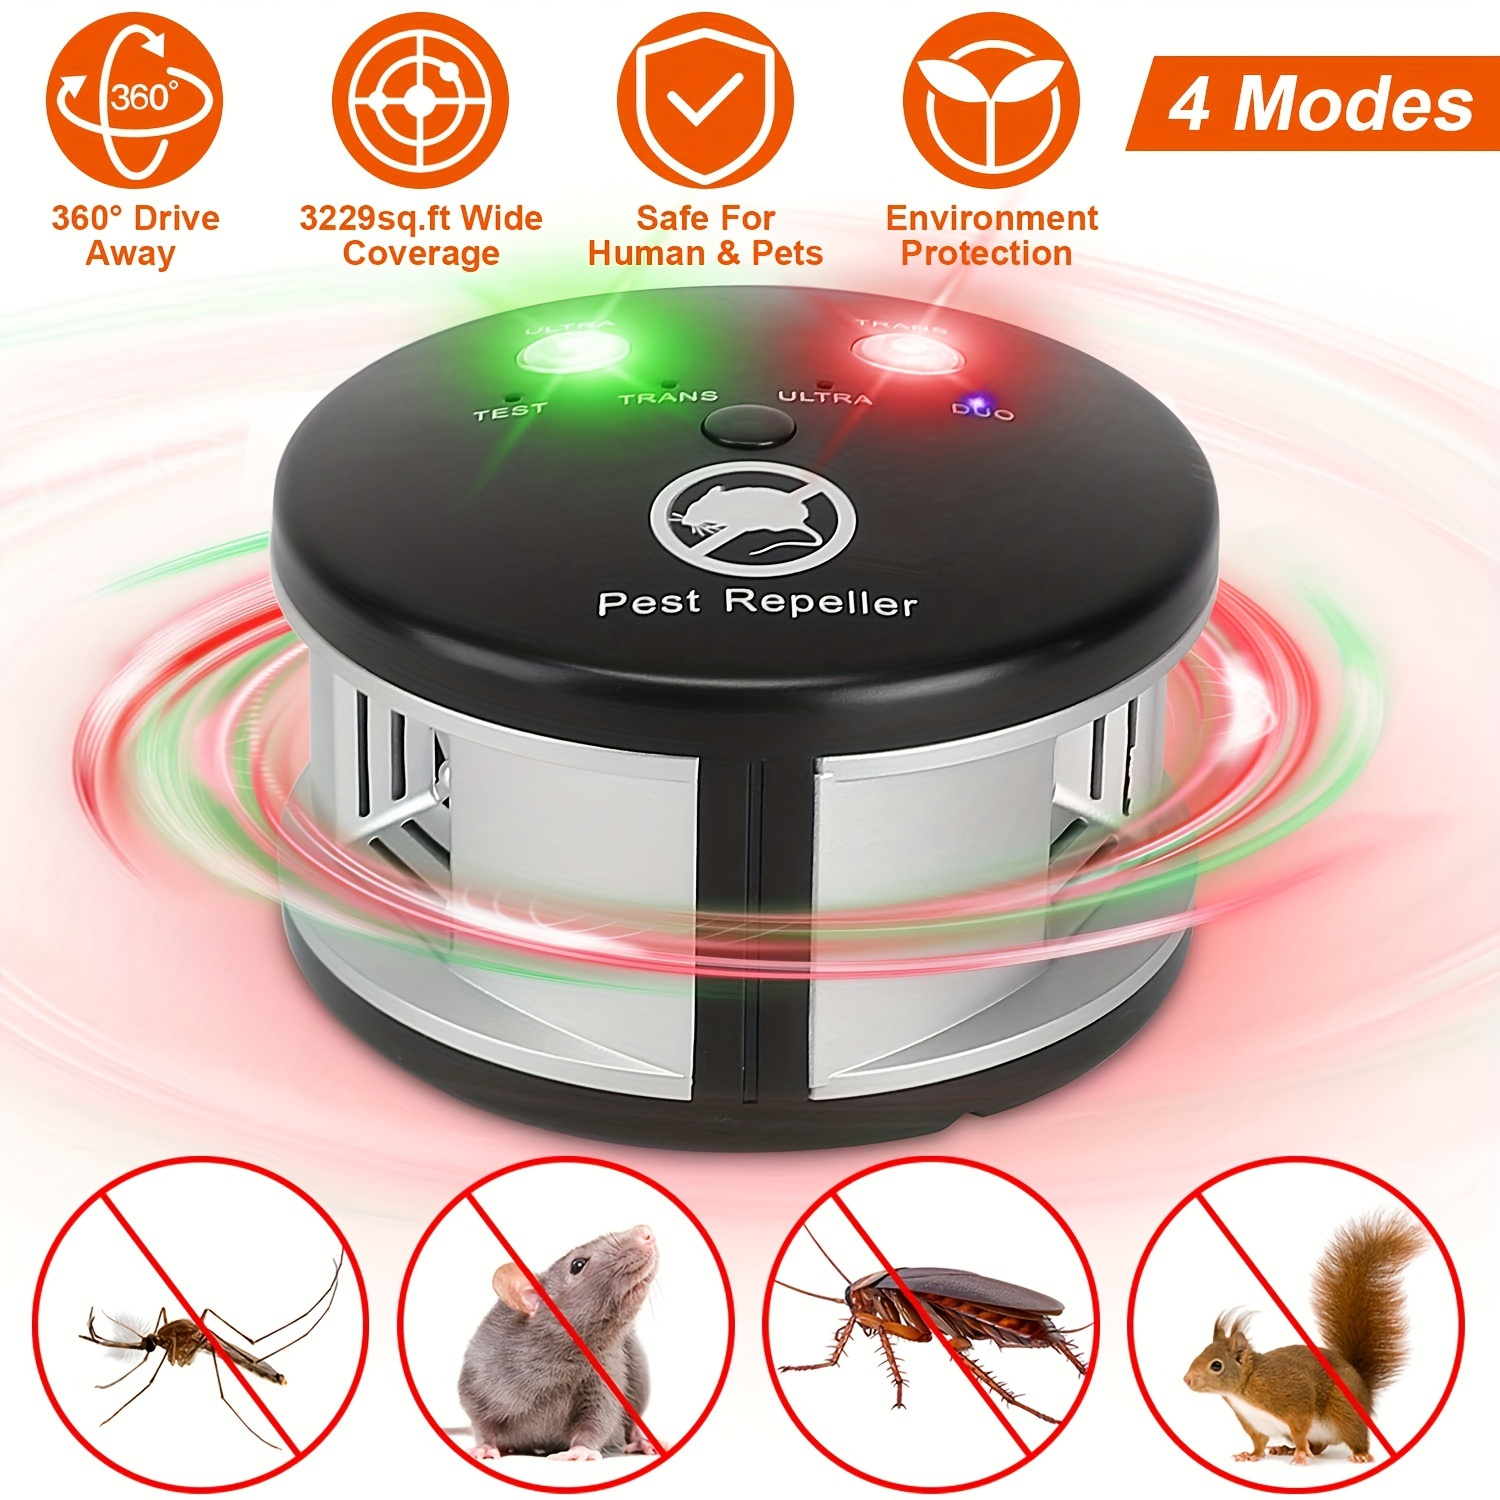 ultrasonic repellent rodents mice repeller 360 degree mouse repellent pest control mouse chaser blocker repellent deterrent with pressure wave ultrasonic sound for indoor use details 0